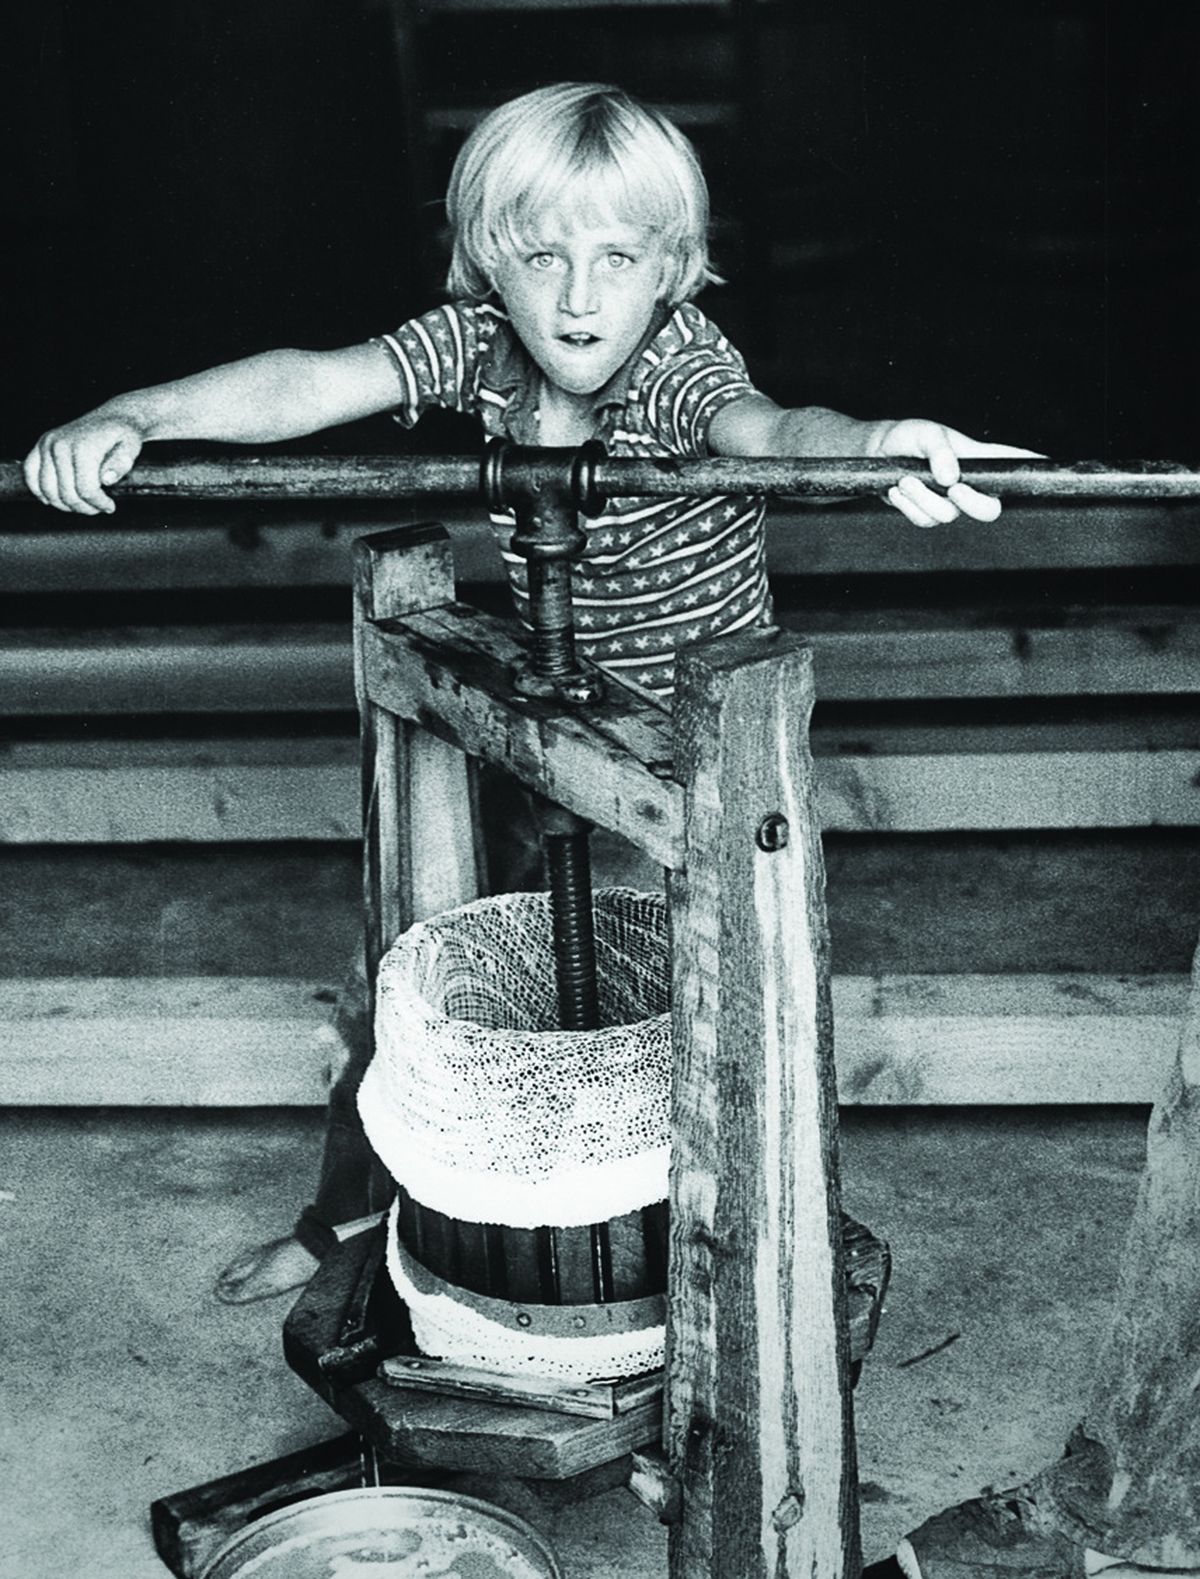 Adam Campbell crushes grapes by hand as a boy in 1978. Today, Campbell runs Elk Cove Vineyards, which his parents started in 1974.